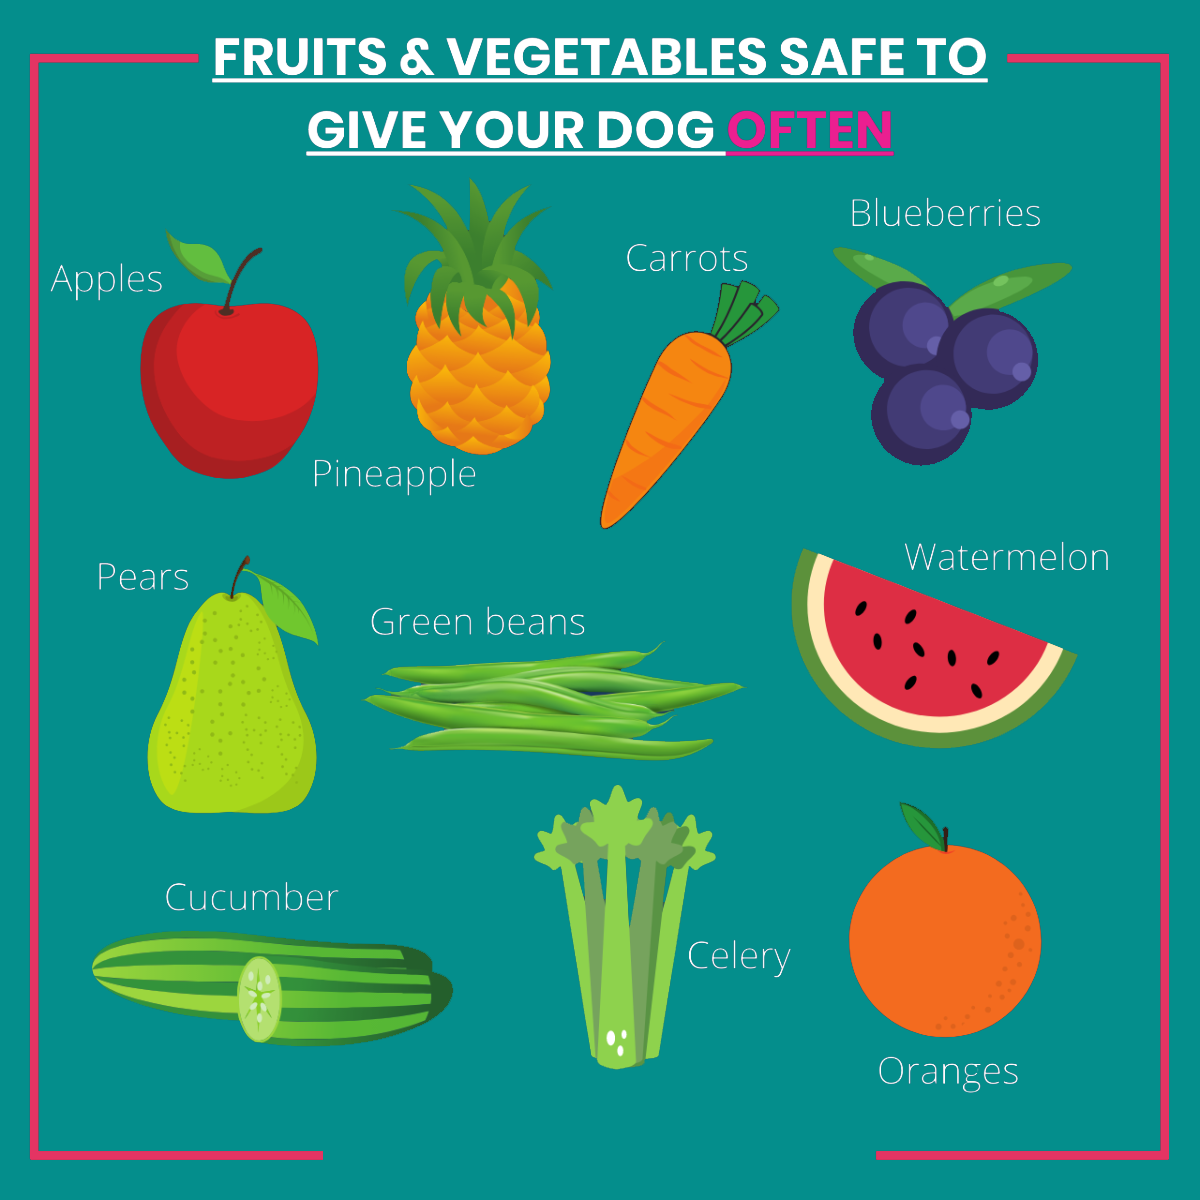 A graphic of fruits and vegetables that are safe for dogs to eat